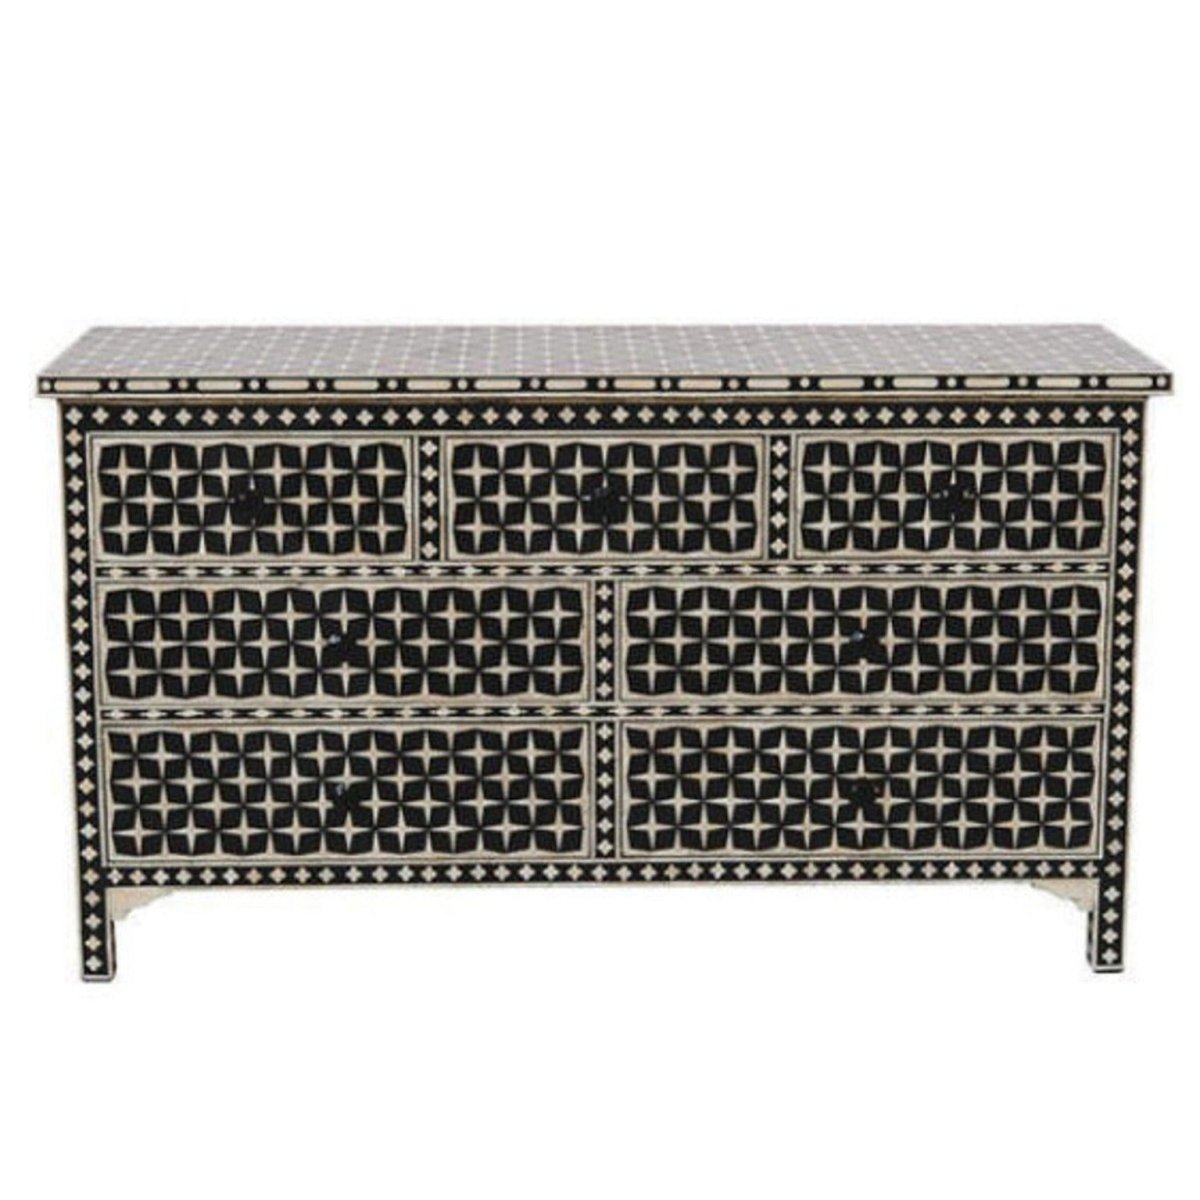 Bone Inlay Beautifully Crafted Dresser | Handmade 7 Drawers Dresser in Black Color Chest of Drawers - Bone Inlay Furnitures